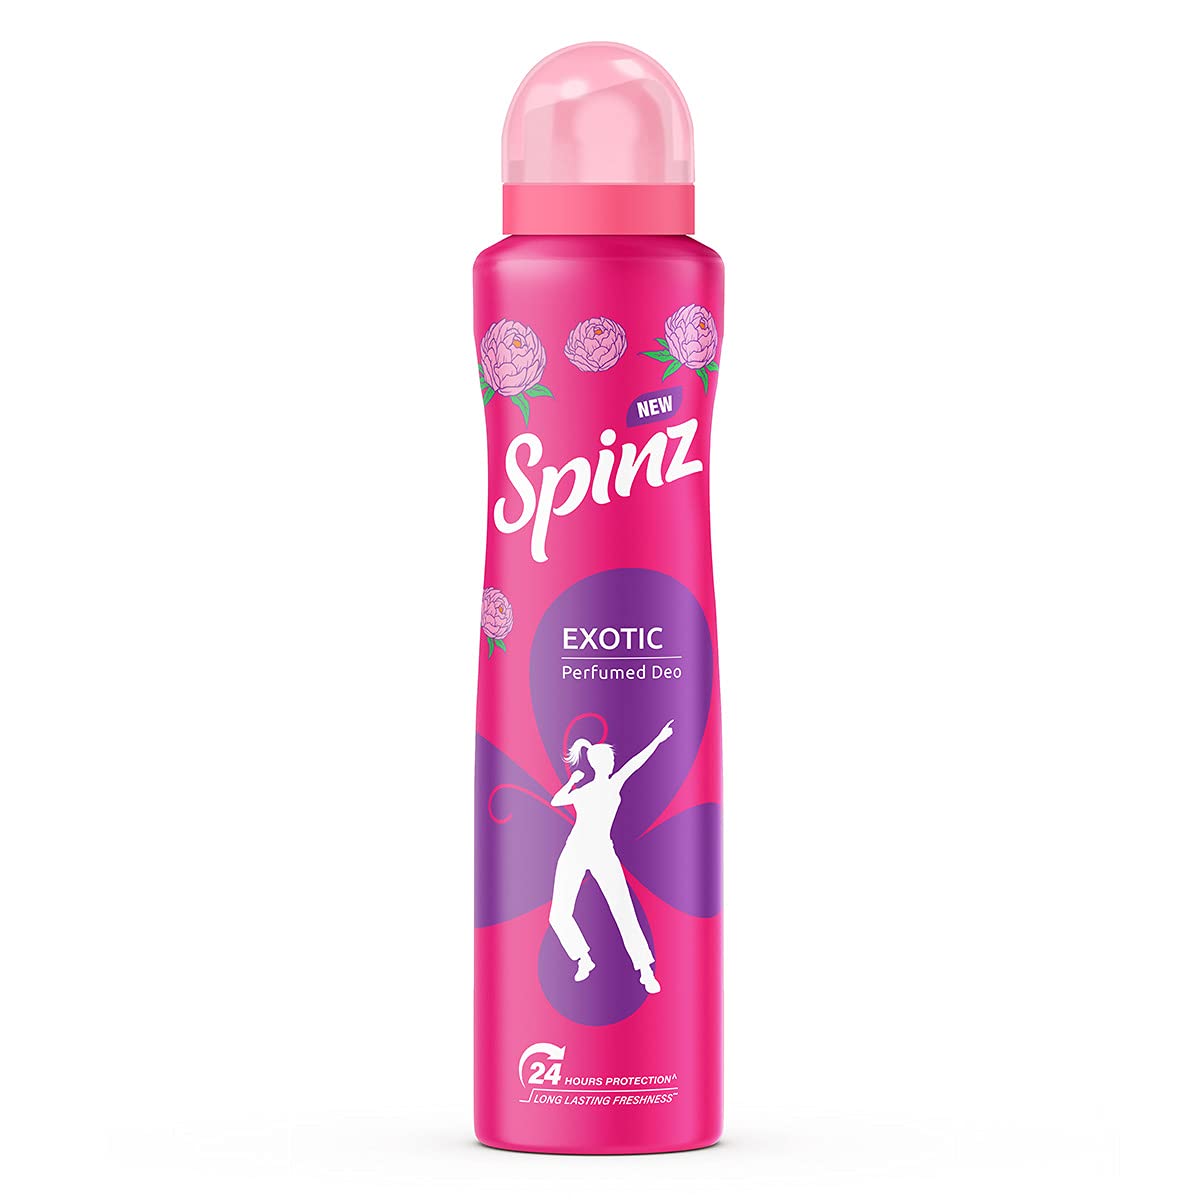 Spinz Exotic Perfumed Deo for Women